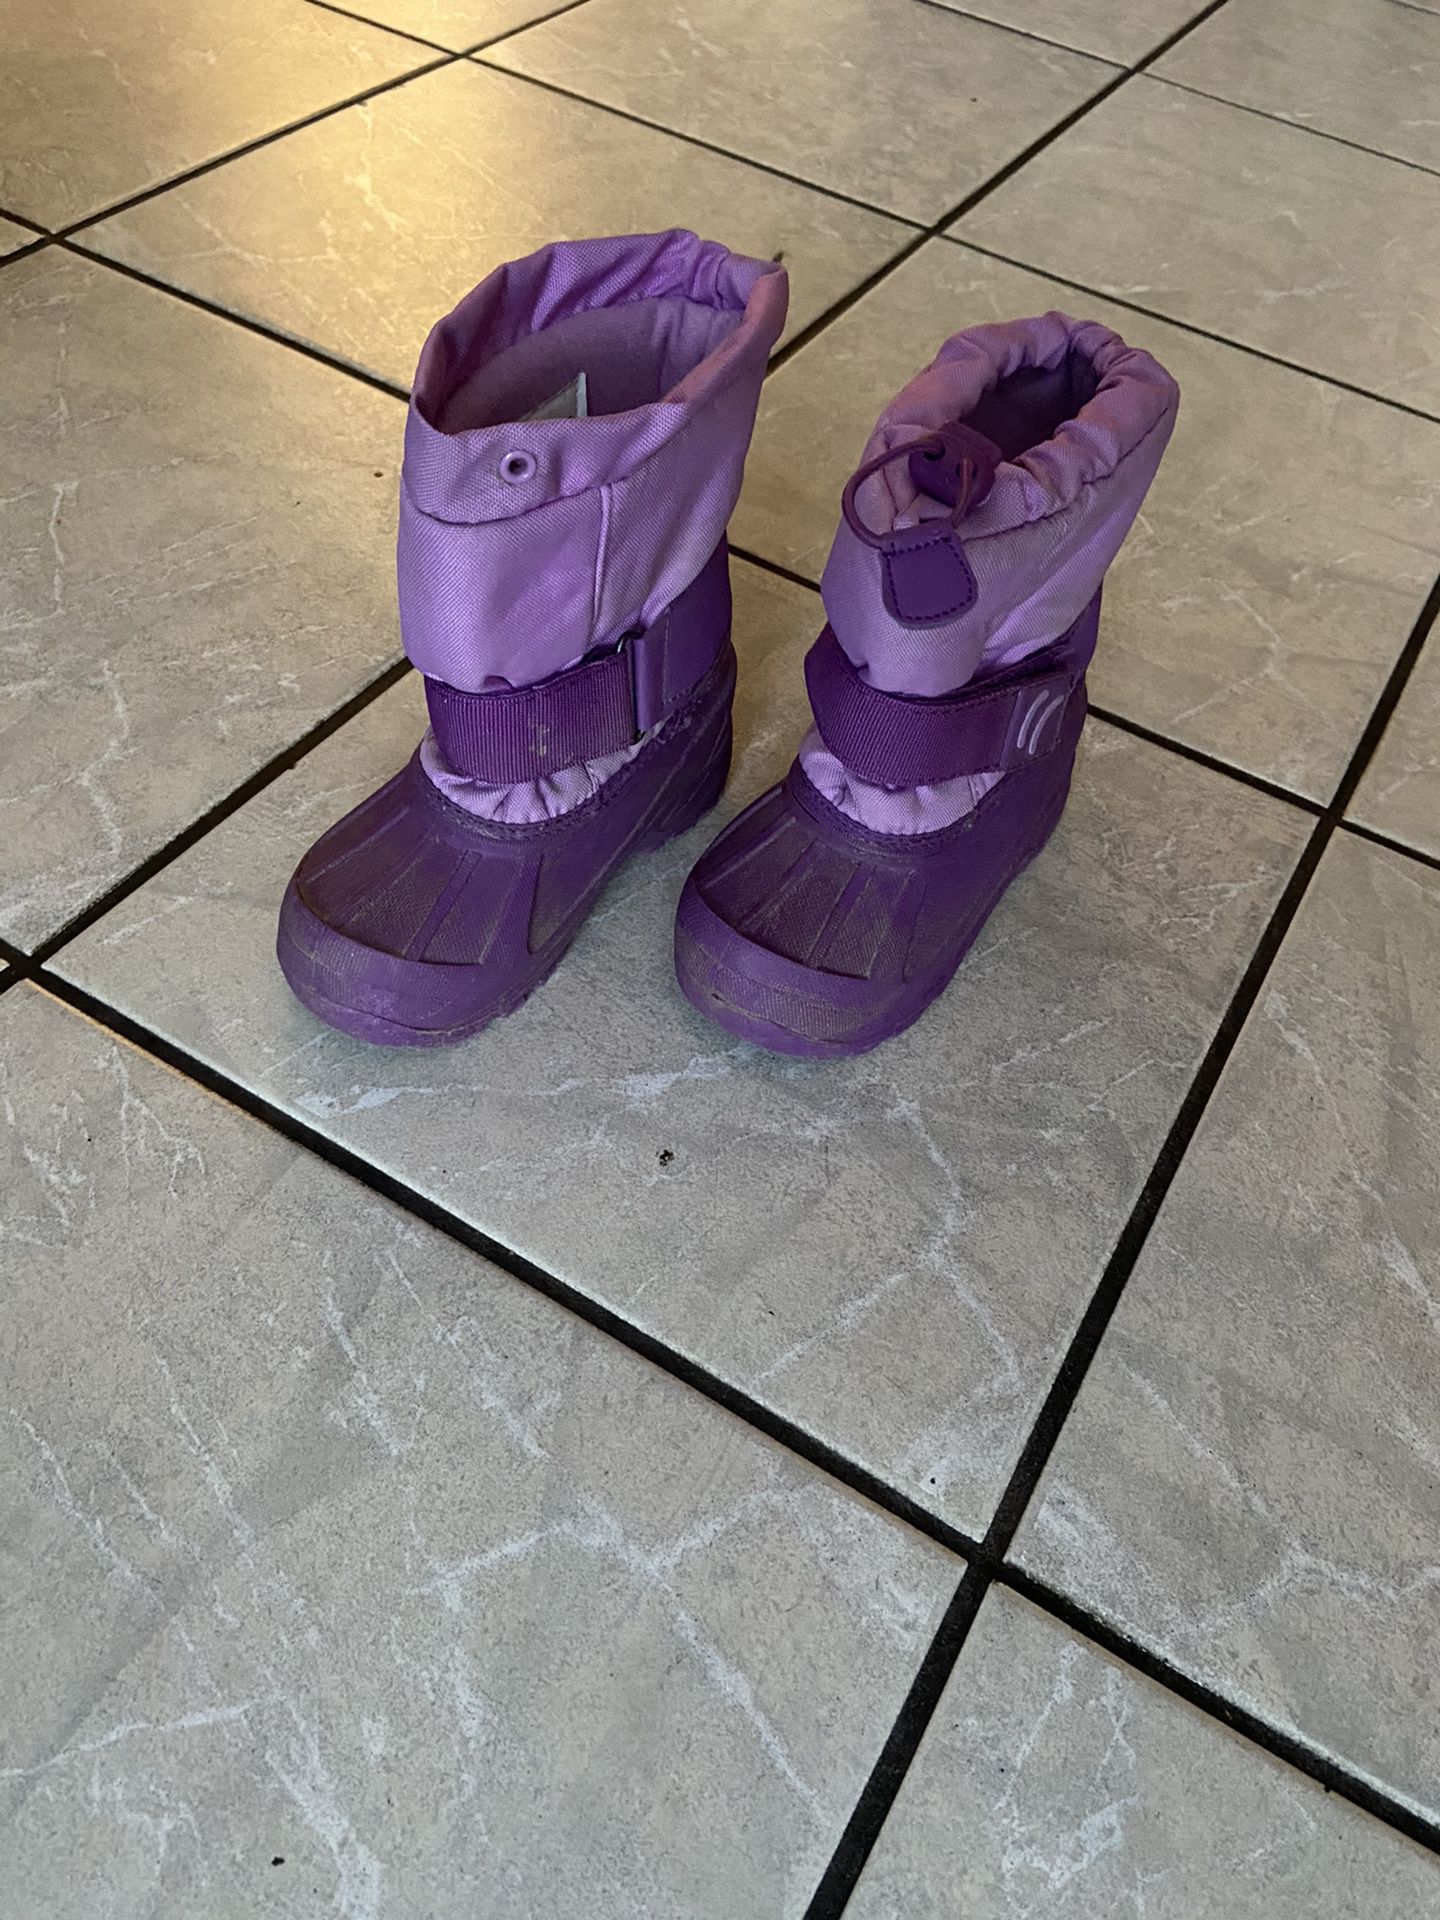 Snow boots for girls